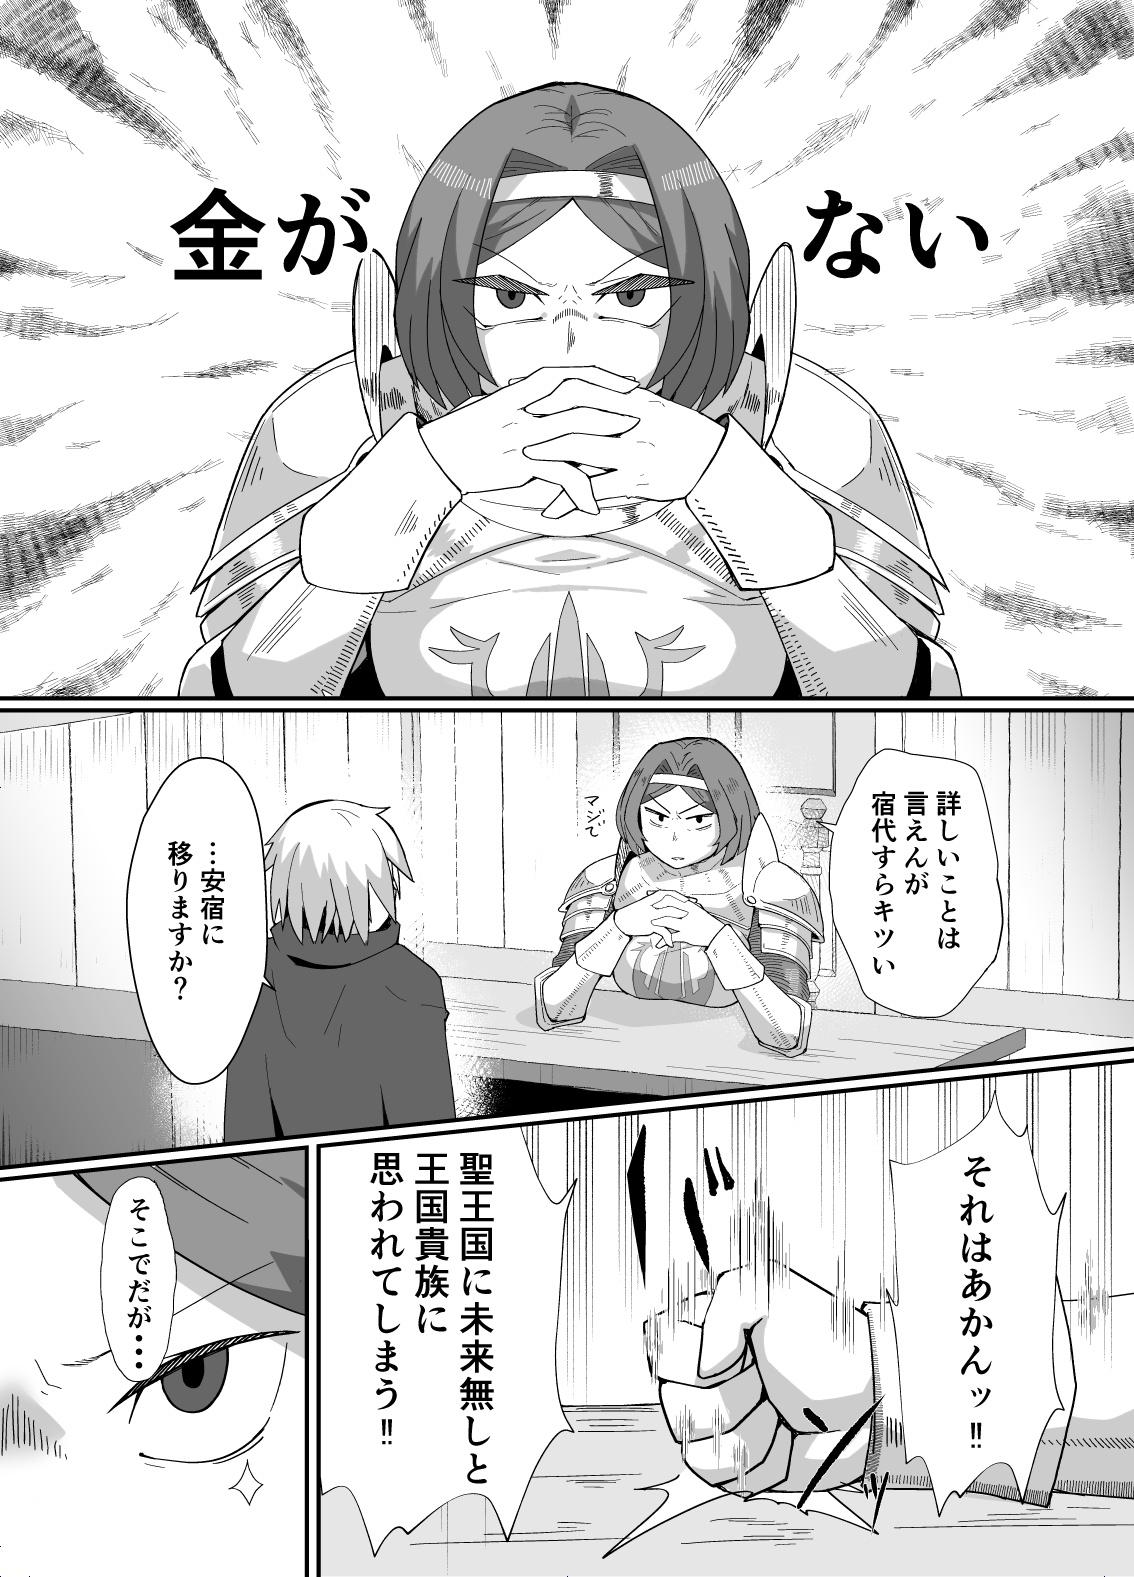 Hugetits Neia-chan's Doujinshi - Overlord Argenta - Page 1